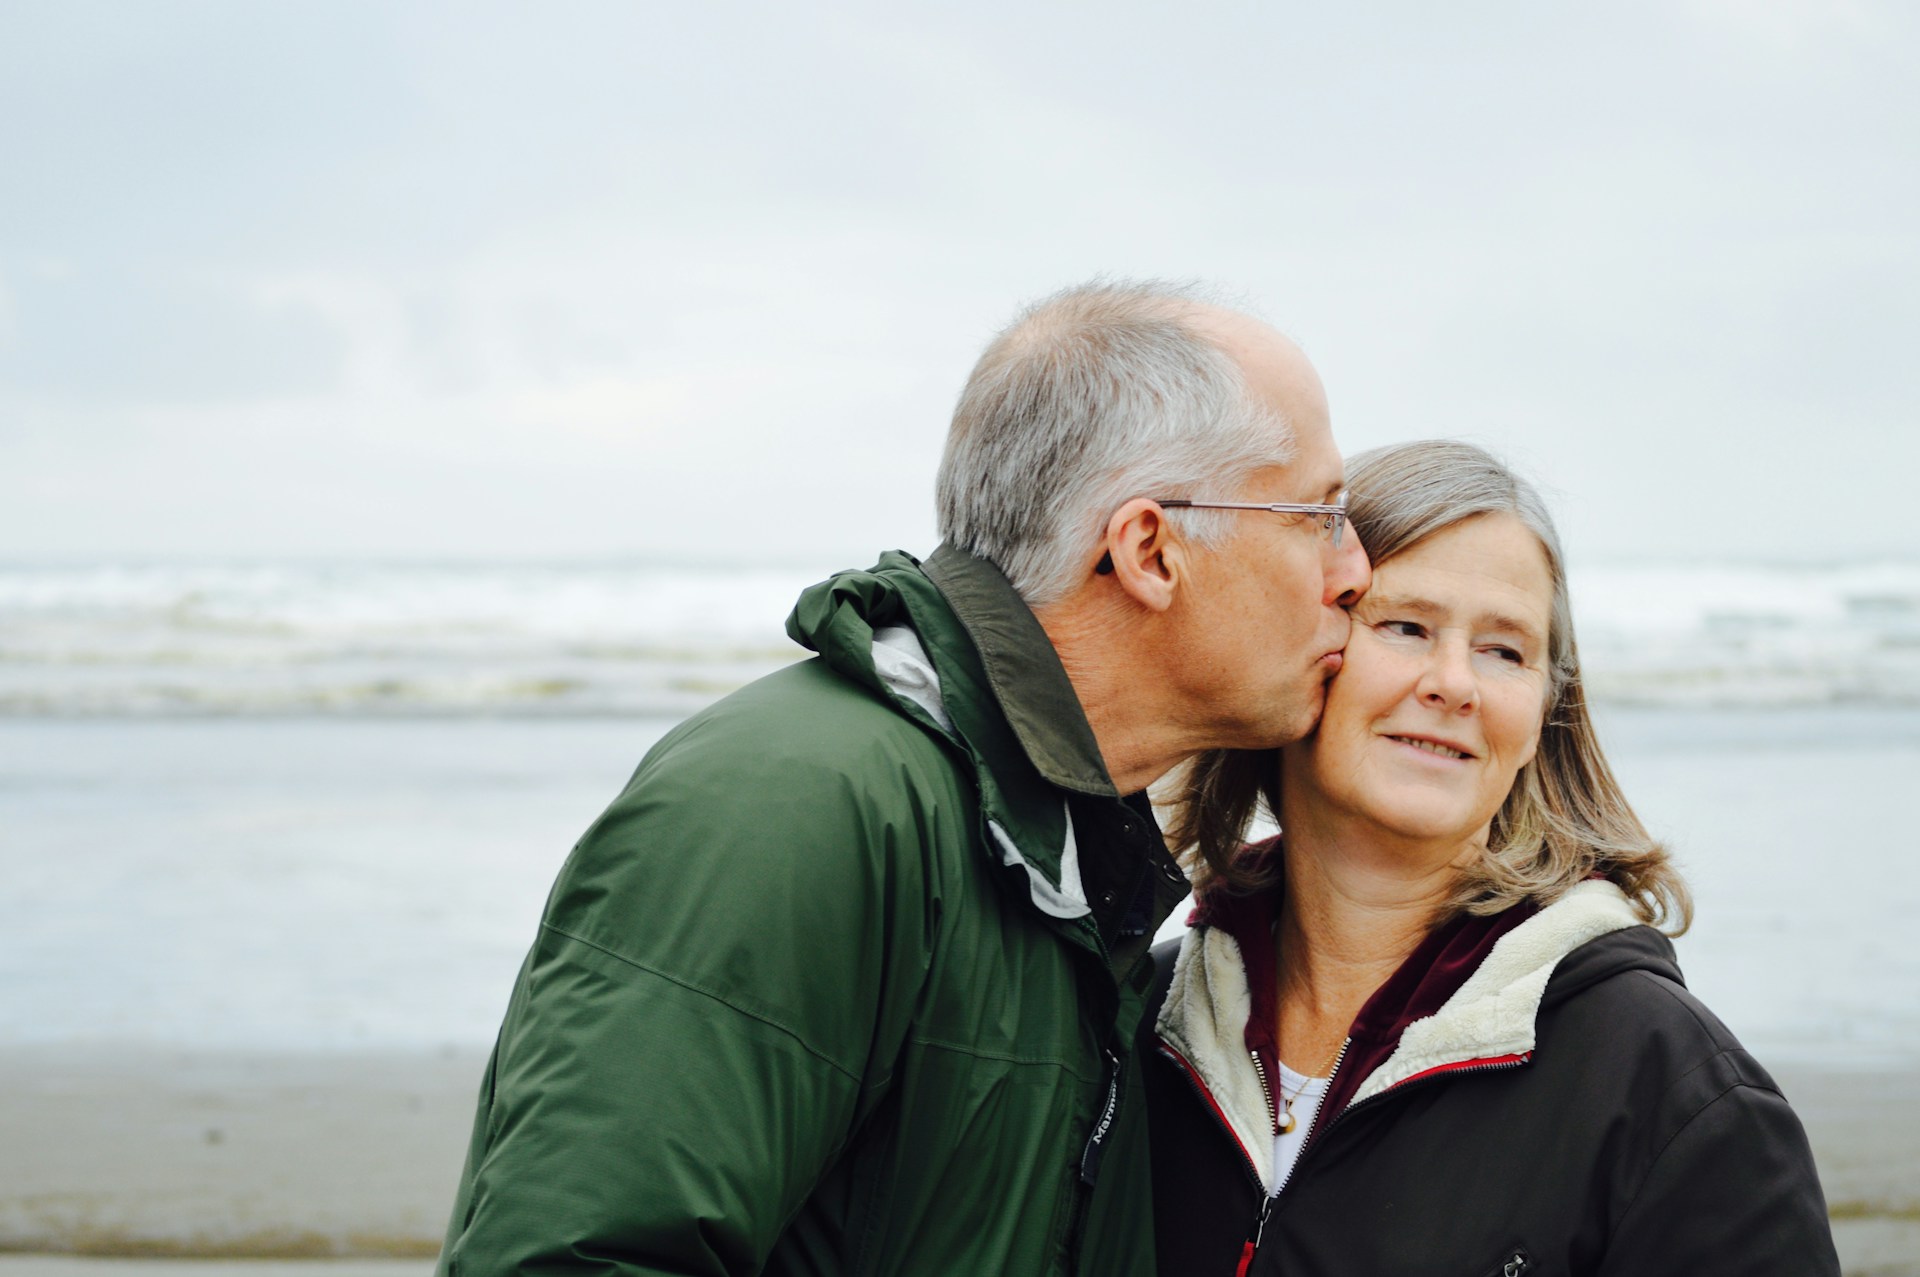 Intimacy in Later Life. Photo of a grey-haired man kissing his middle aged female partner on a beach.